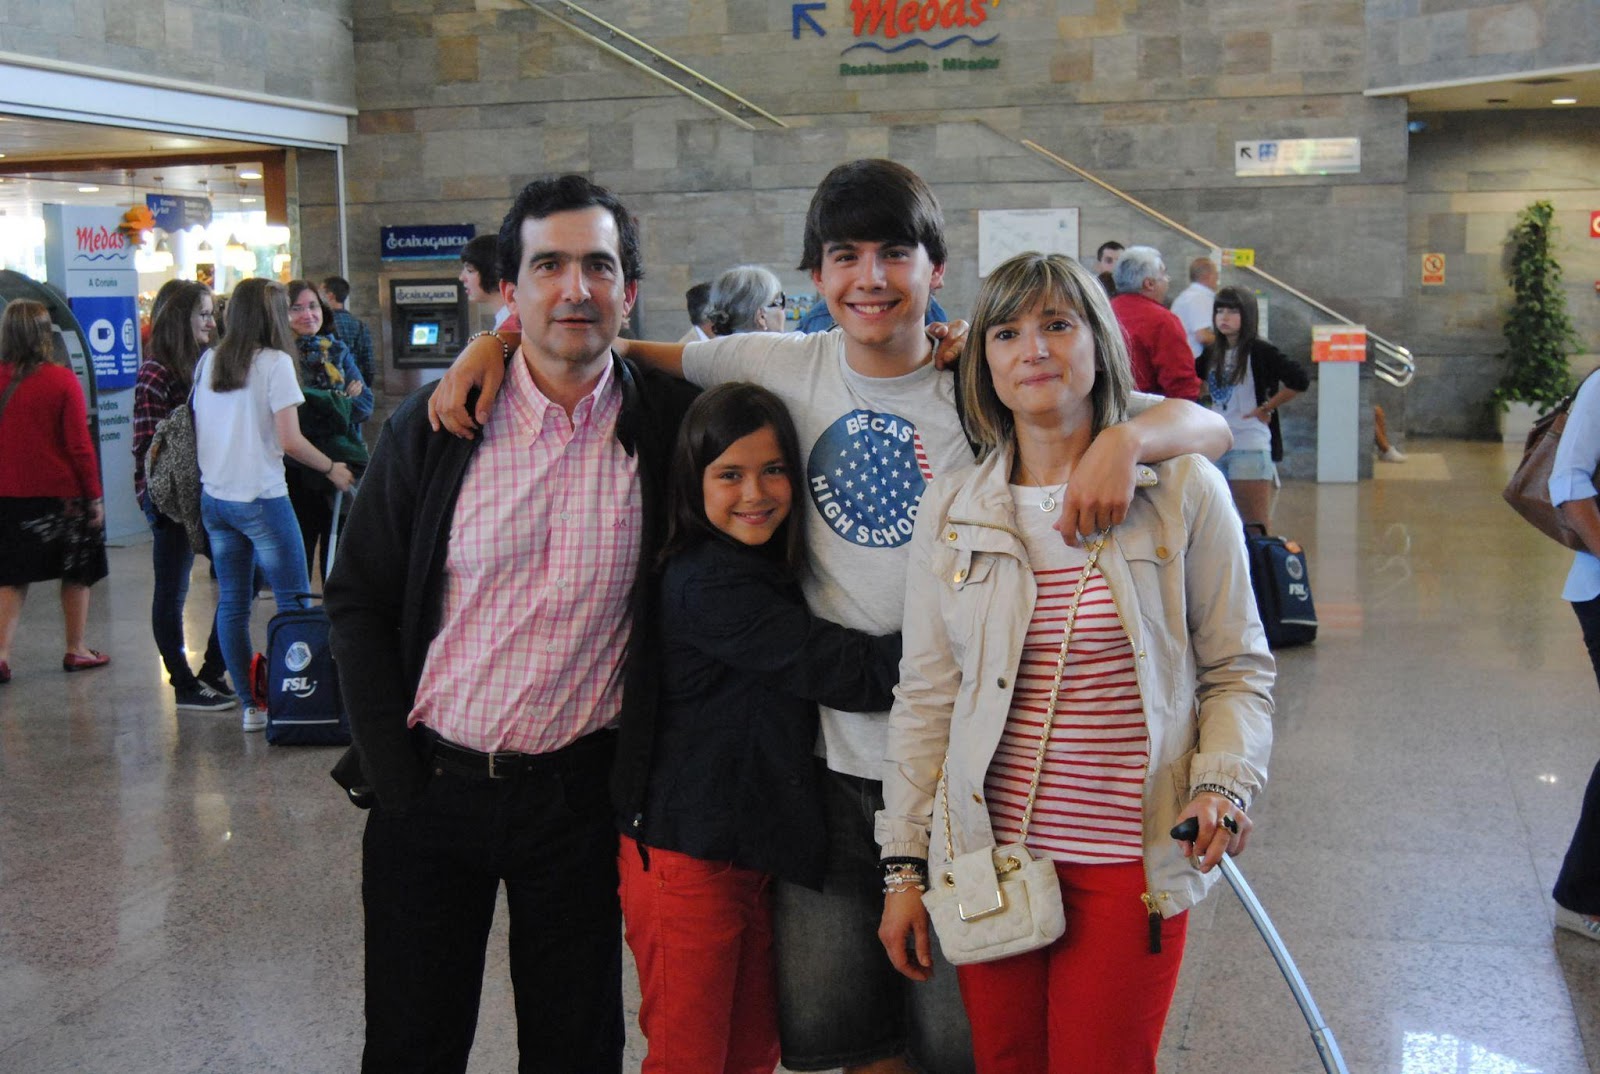 A family photo shows the author as a teen at the A Coruña airport with his family, about to leave for the US as an exchange student